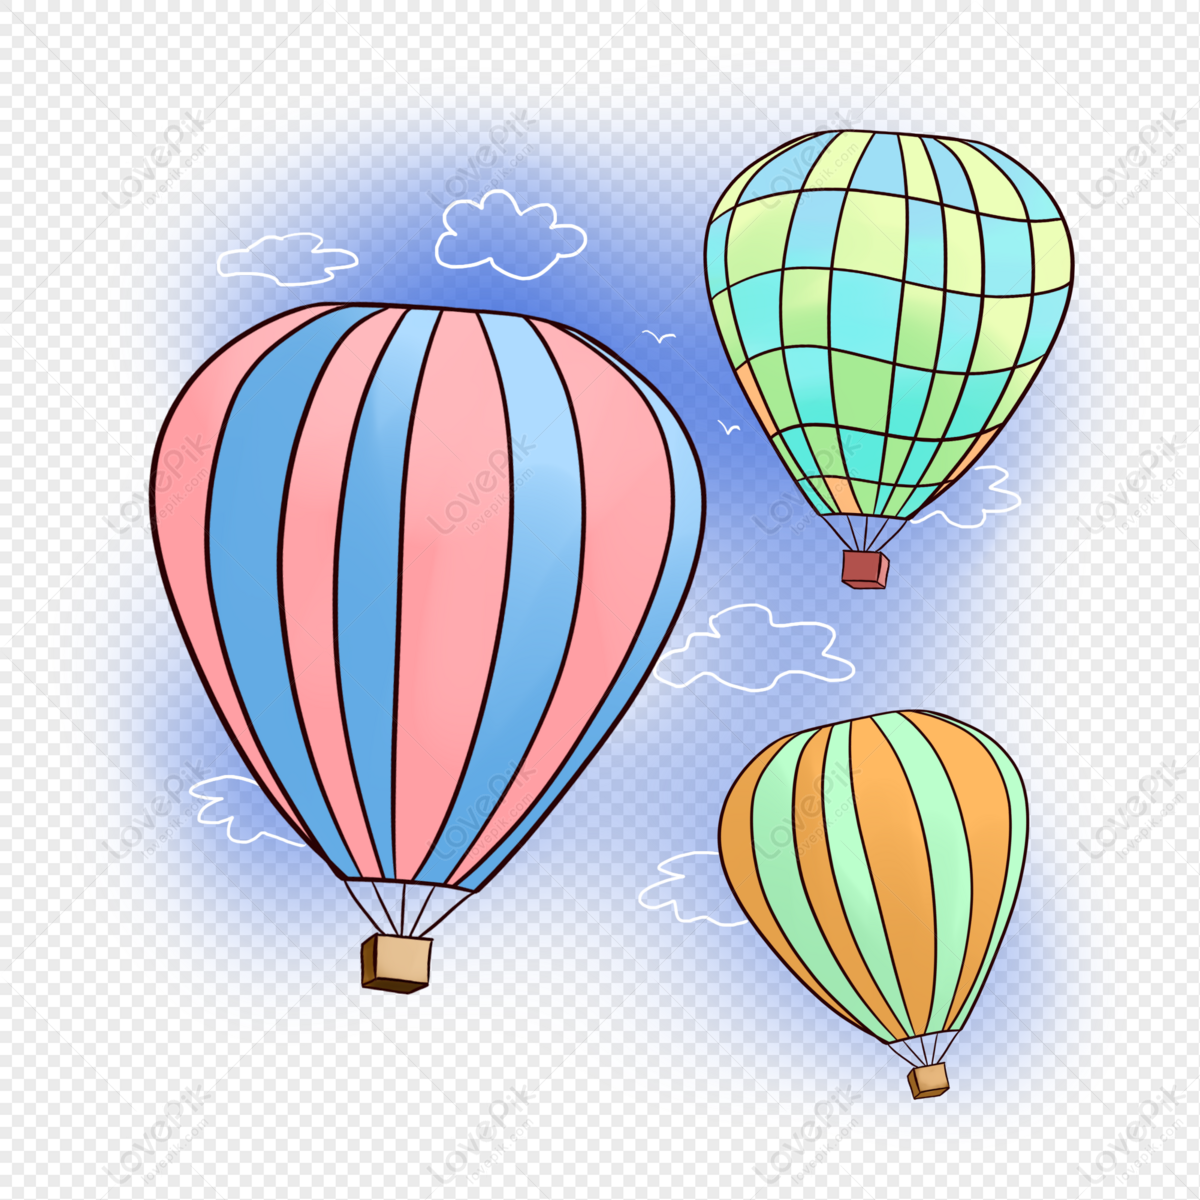 Cartoon Hot Air Balloon Flying In The Air PNG Picture And Clipart Image For  Free Download - Lovepik | 401404305